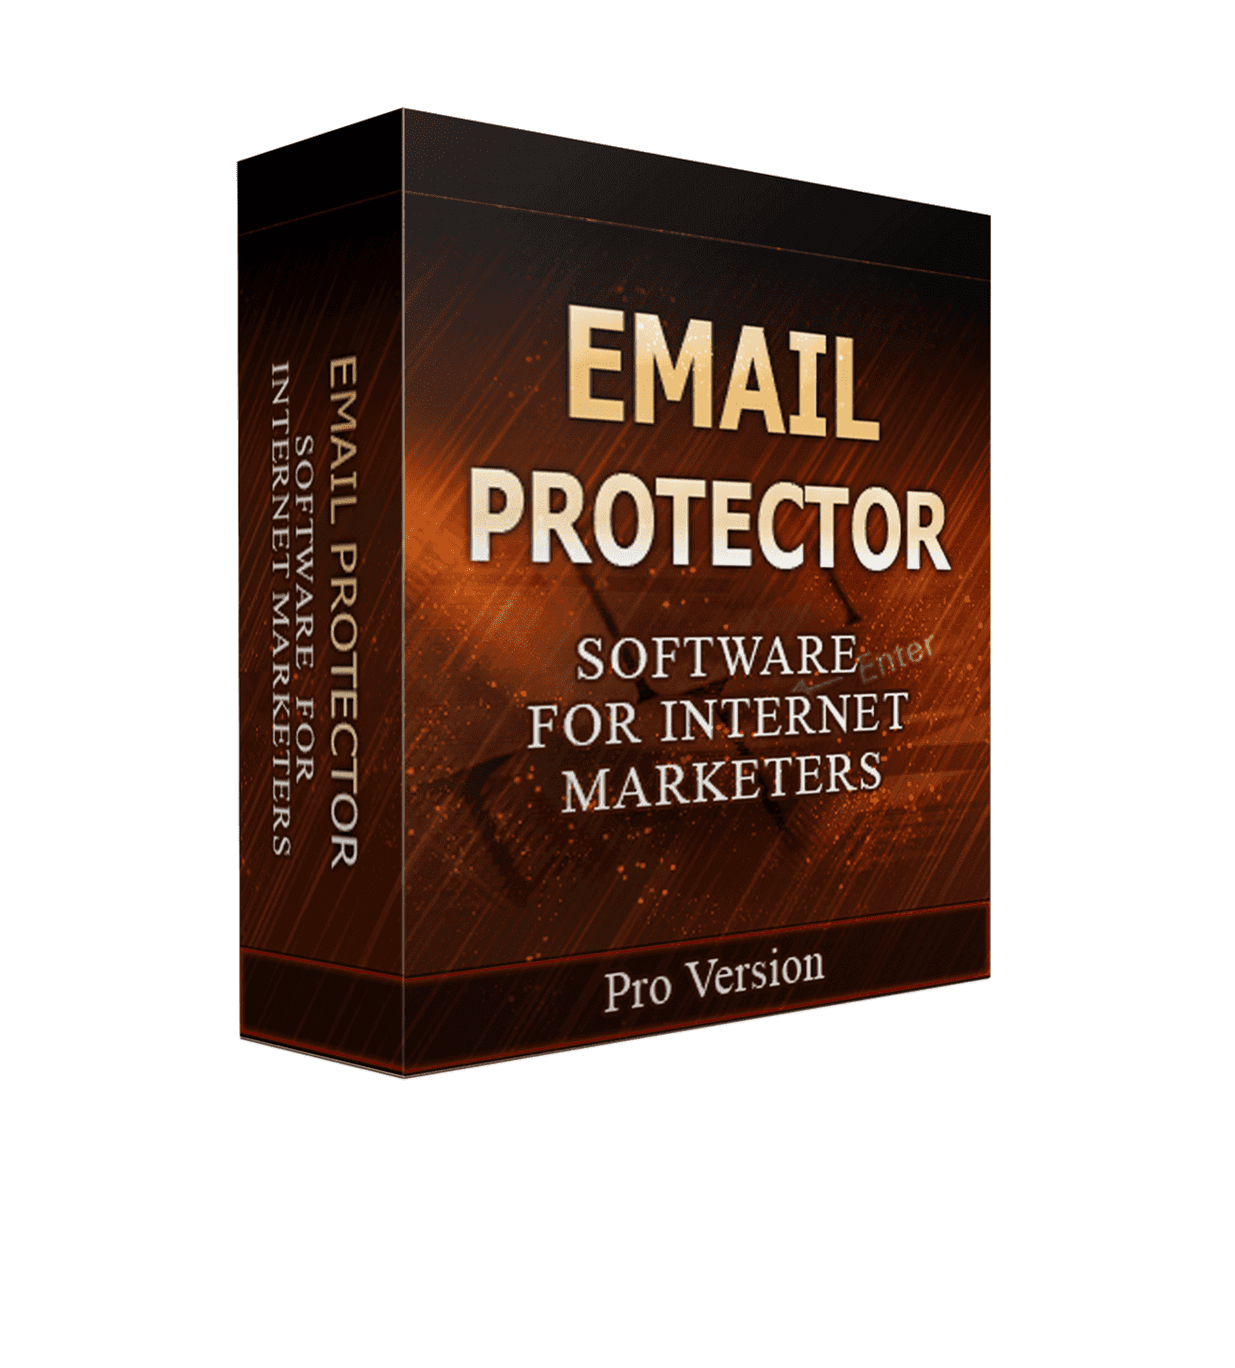 Email Protector Software